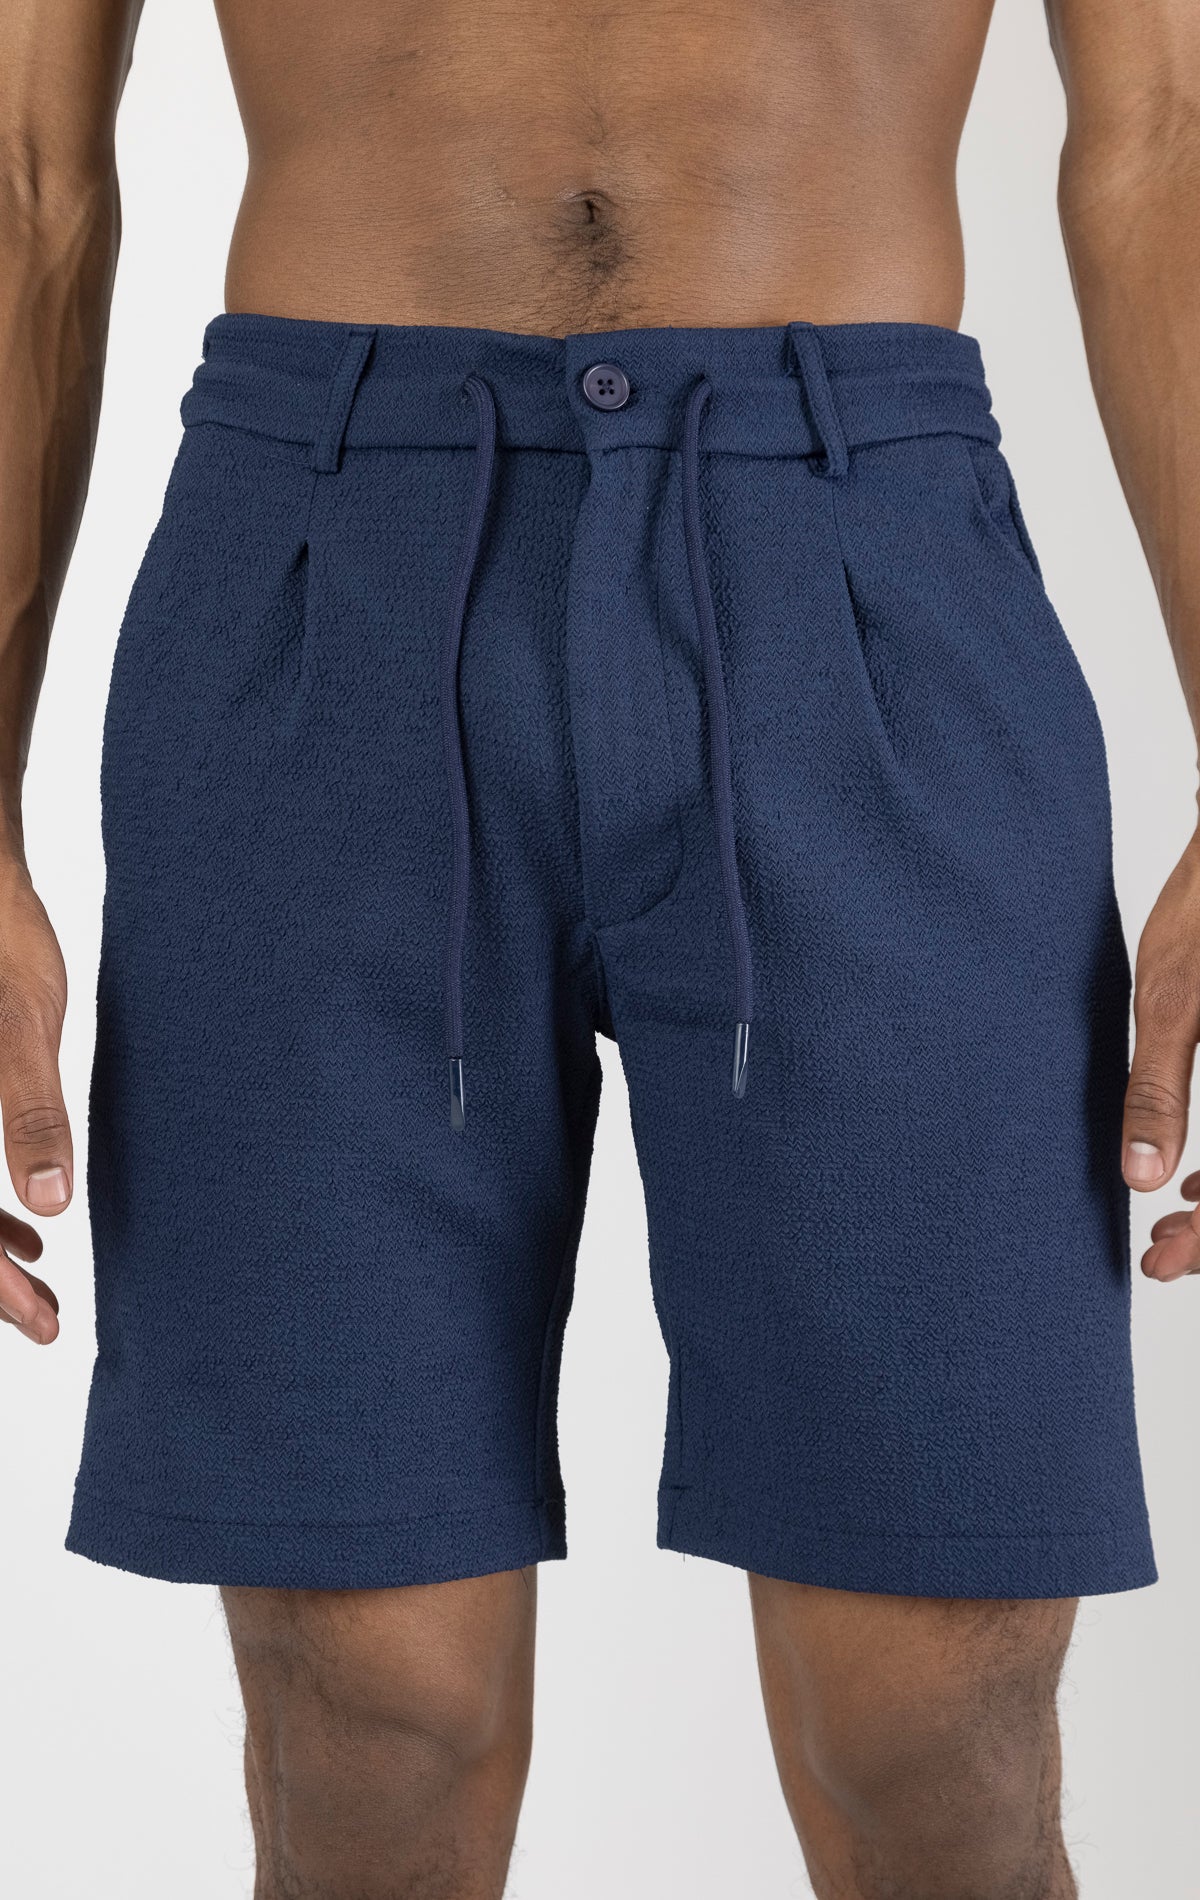 Men's elegant everyday shorts in navy. The shorts are made from a blend of polyester (74%), viscose (24%), and elastane (2%) and feature a tailored fit and a versatile length.